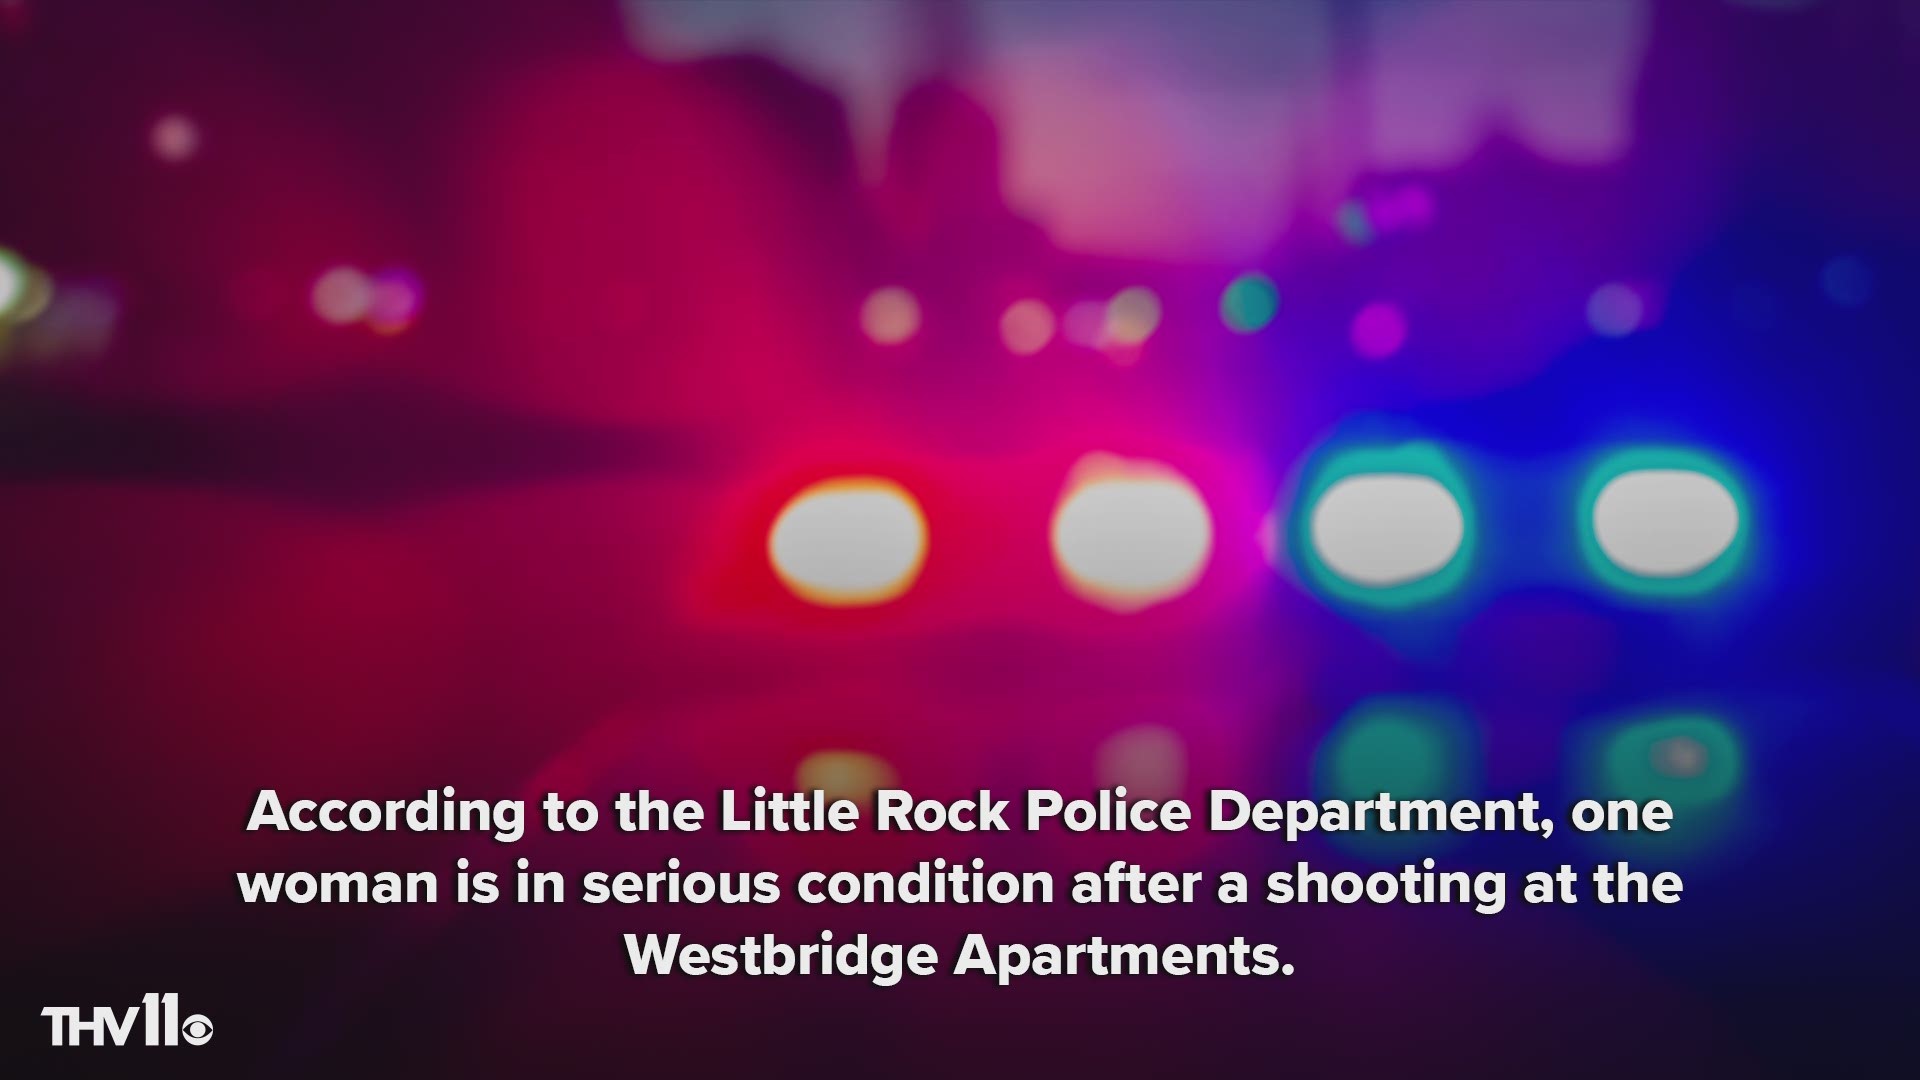 According to the Little Rock Police Department, one woman is in serious condition after a shooting at the Westbridge Apartments.